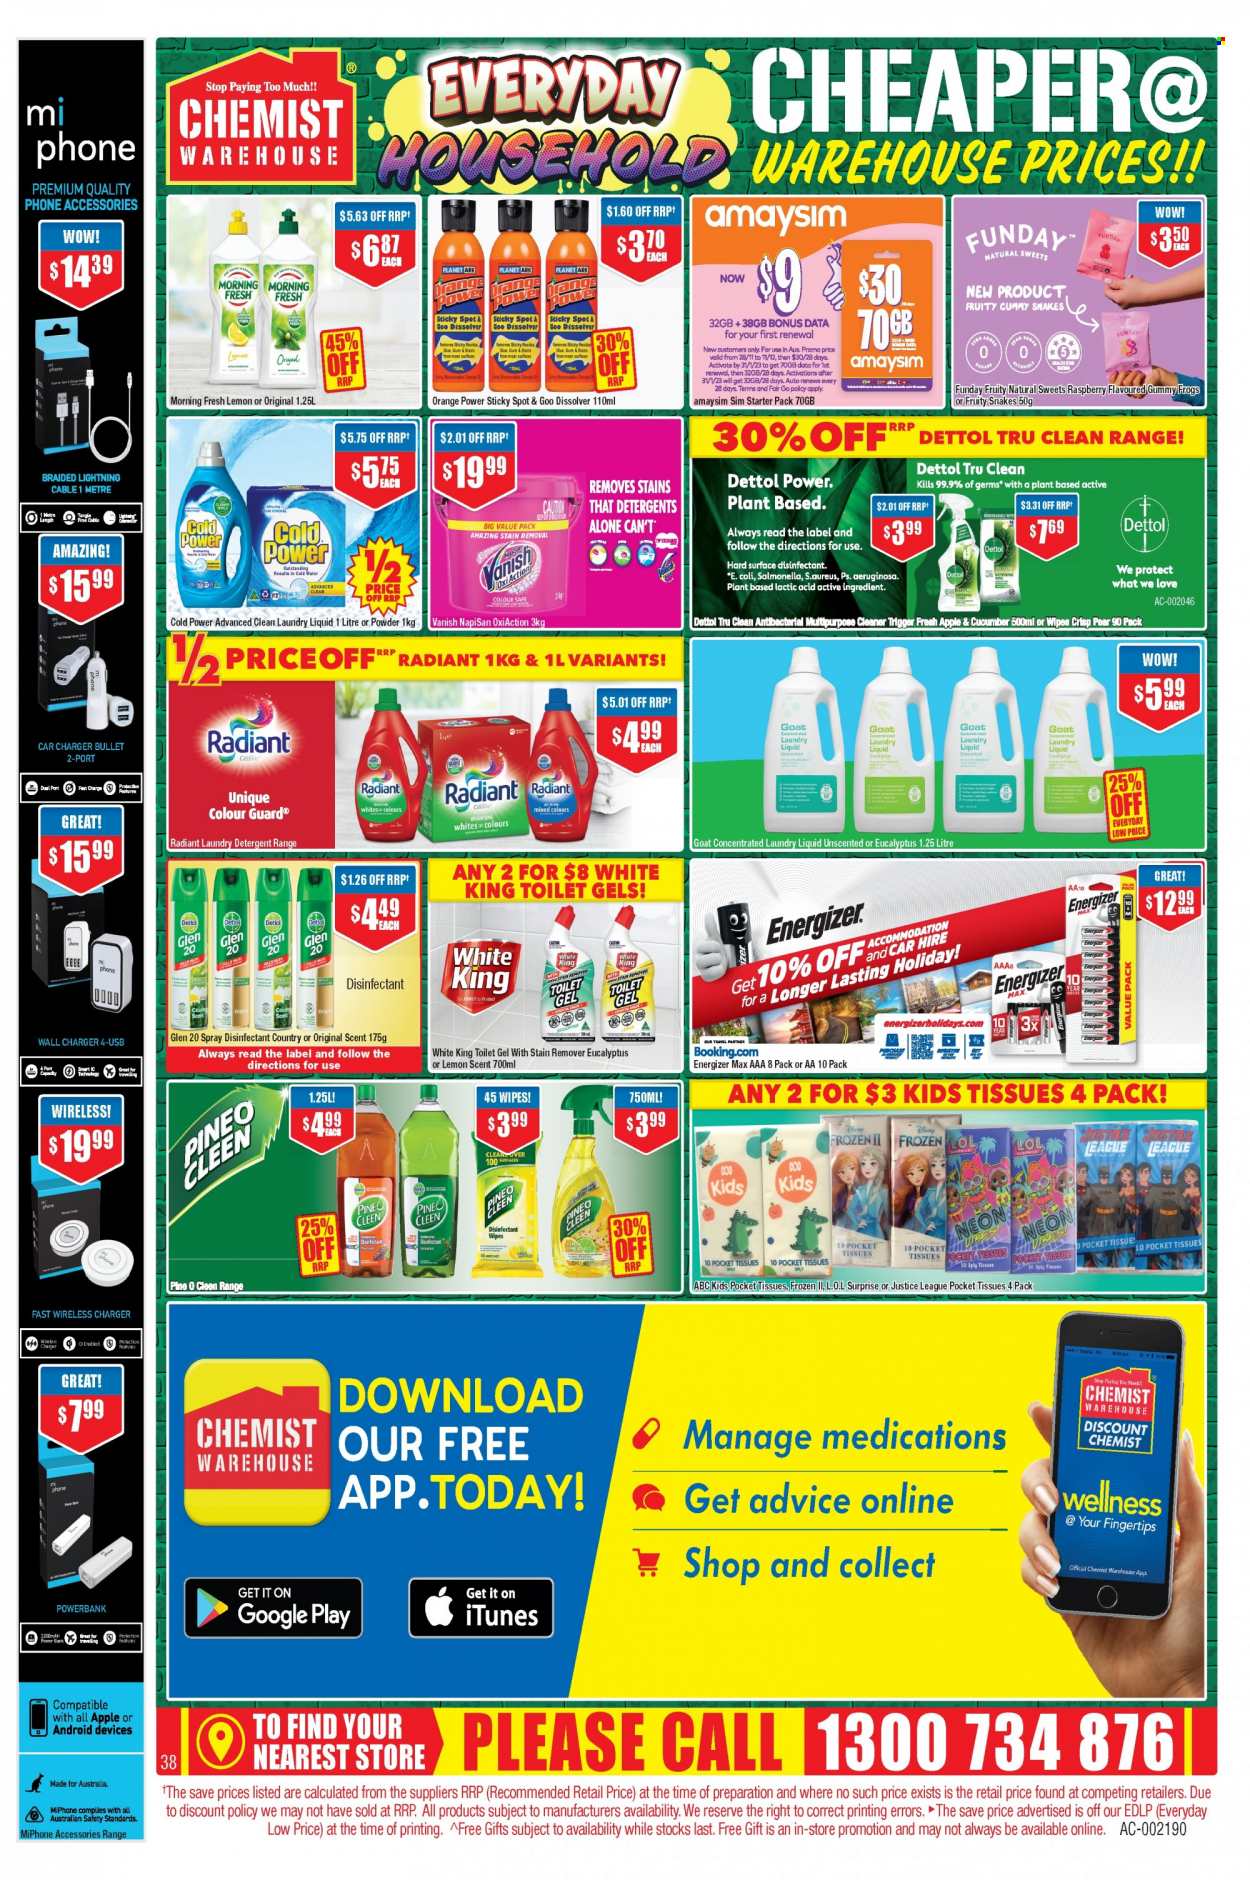 thumbnail - Chemist Warehouse Catalogue - 28 Nov 2022 - 11 Dec 2022 - Sales products - wipes, Disney, Dettol, tissues, detergent, cleaner, desinfection, stain remover, Vanish, laundry detergent. Page 38.